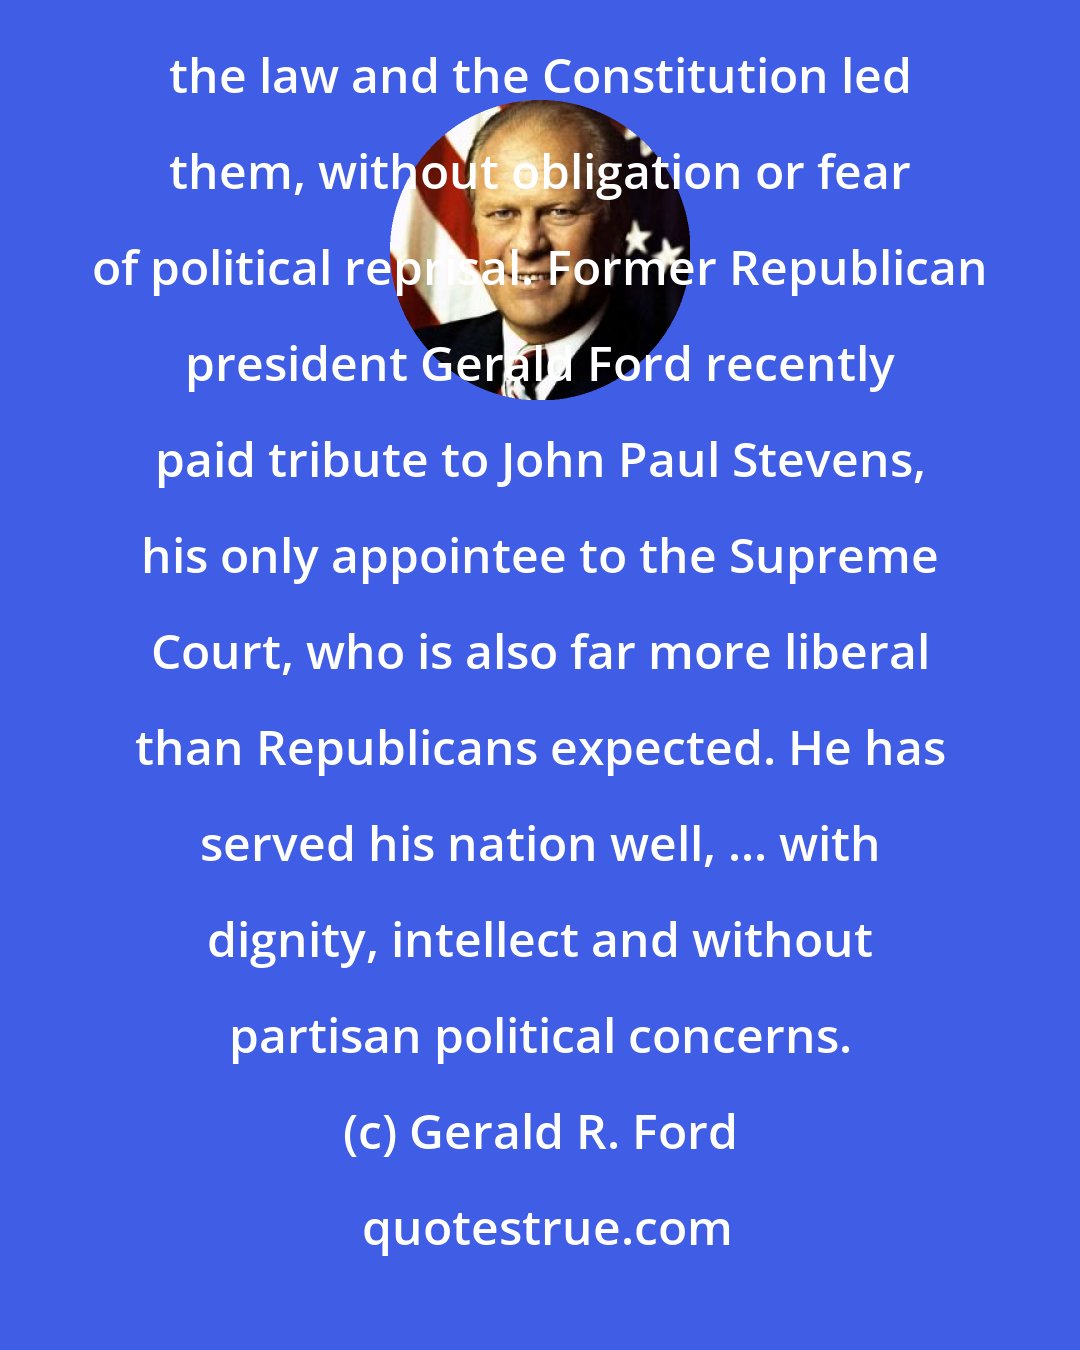 Gerald R. Ford: That, in part, is why the Constitution's framers gave justices life tenure ? to enable them to rule wherever the law and the Constitution led them, without obligation or fear of political reprisal. Former Republican president Gerald Ford recently paid tribute to John Paul Stevens, his only appointee to the Supreme Court, who is also far more liberal than Republicans expected. He has served his nation well, ... with dignity, intellect and without partisan political concerns.